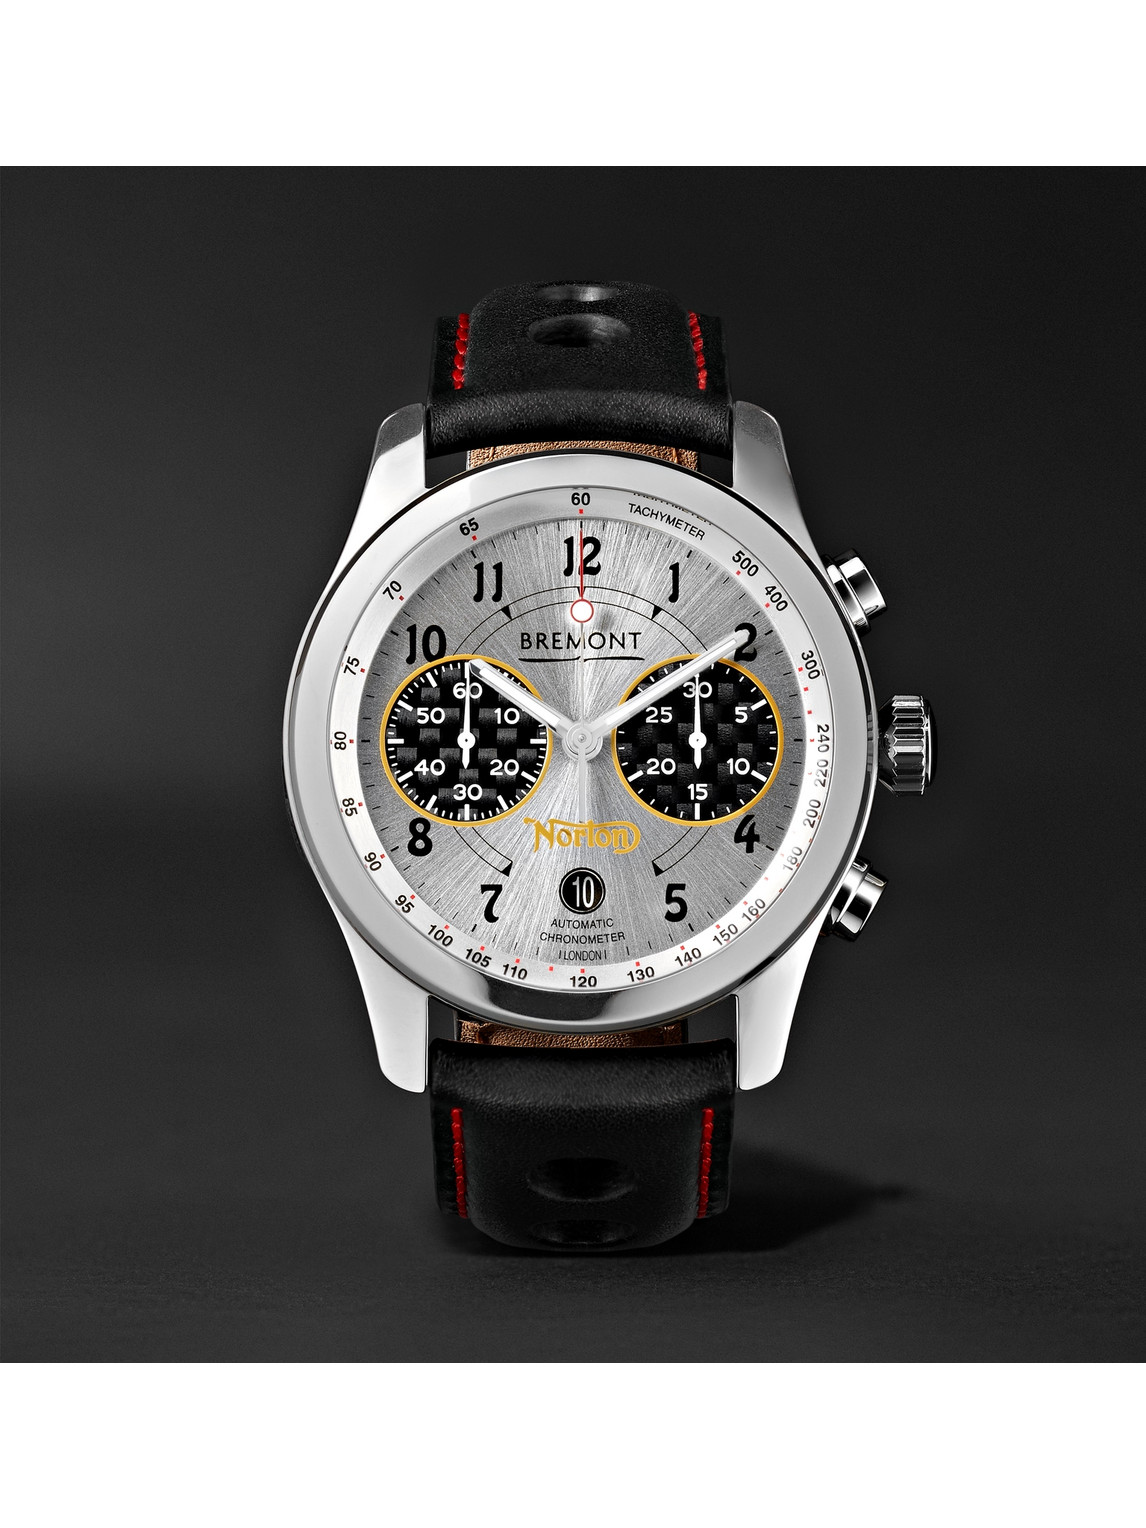 Norton V4/RR Limited Edition Automatic Chronometer 43mm Stainless Steel and Leather Watch